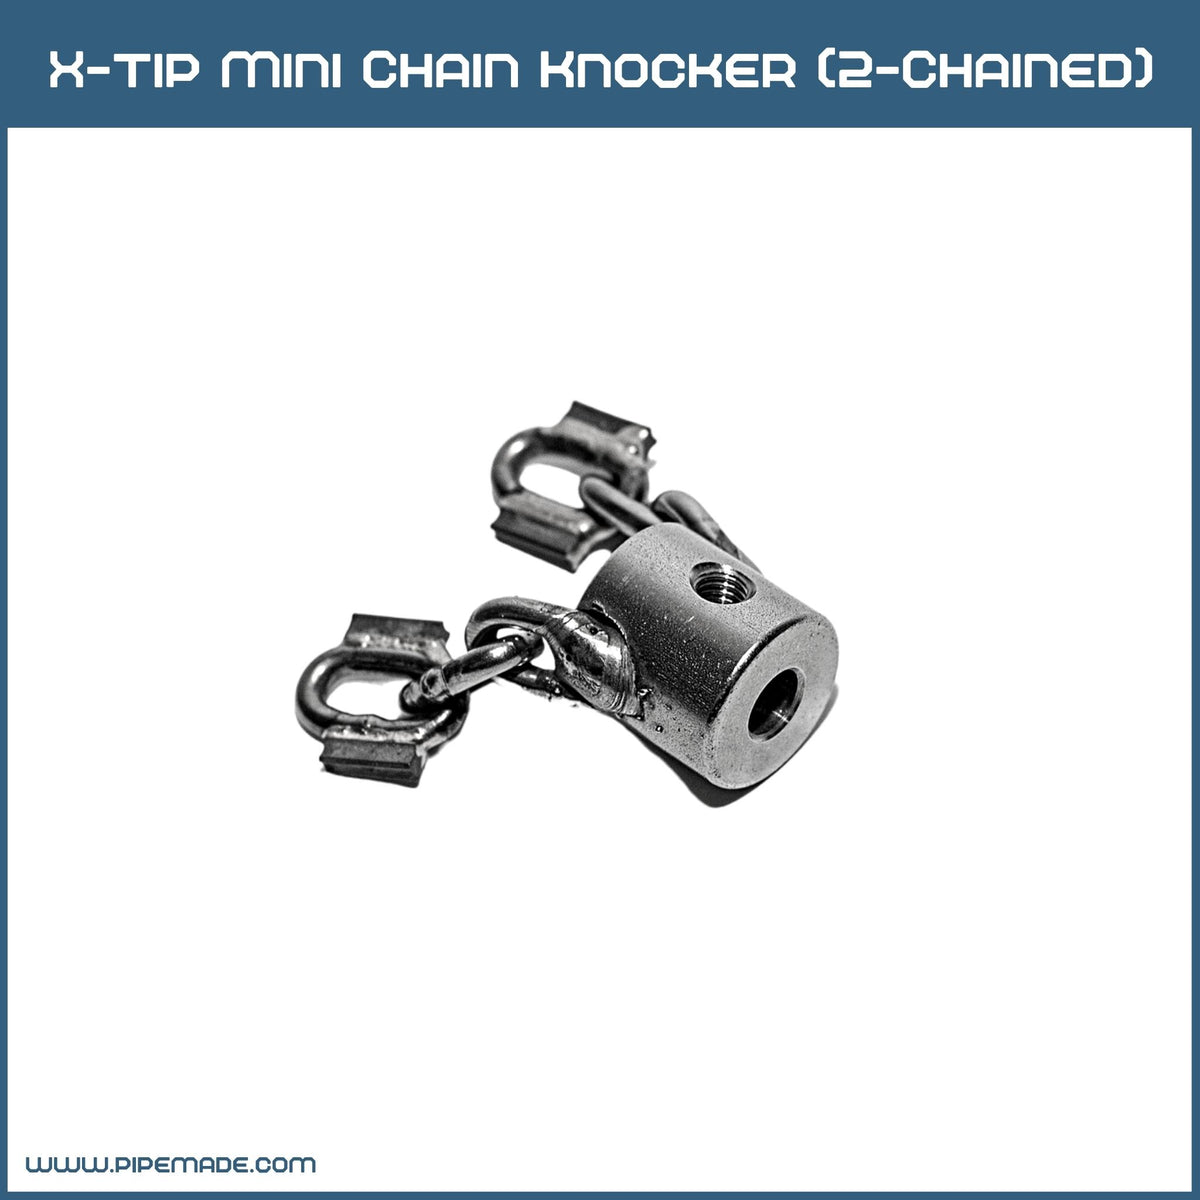 X-Tip Mini Chain Knocker (2-Chained) | X-tip Chain Knockers. Cleaning Chains | Zewer | x-tip-mini-chain-knocker-2-chained